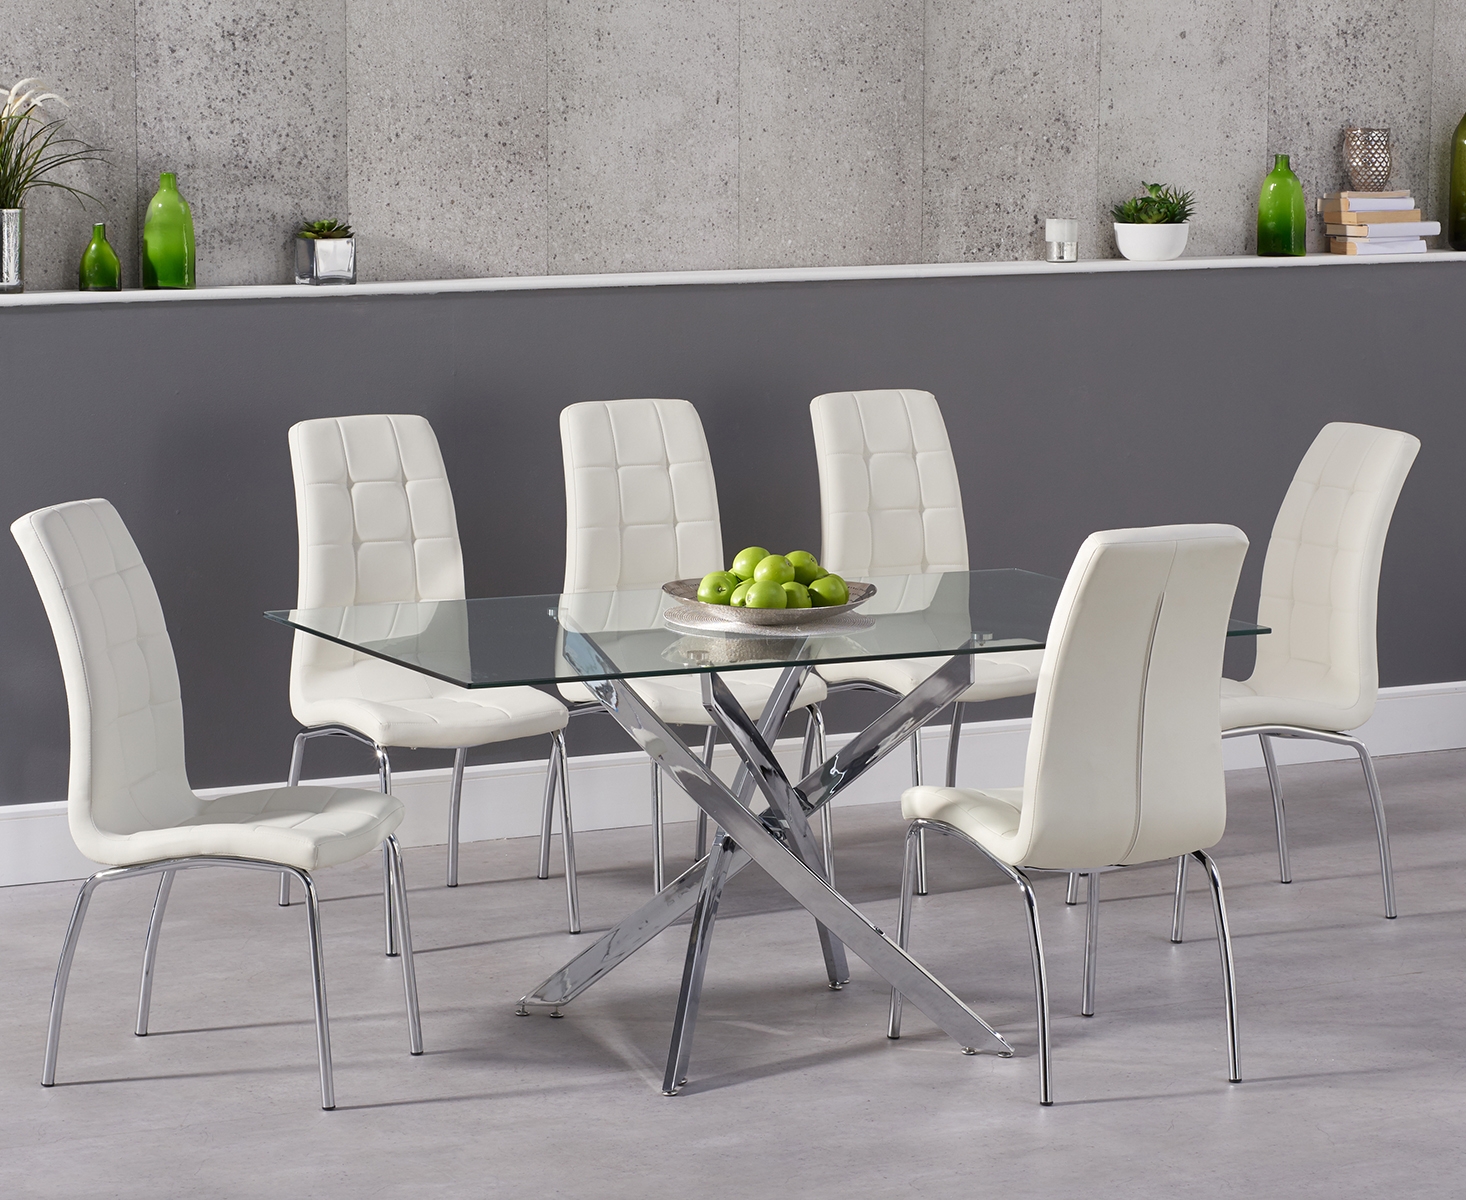 Denver 160cm Rectangular Glass Dining Table With 8 Black Enzo Chairs